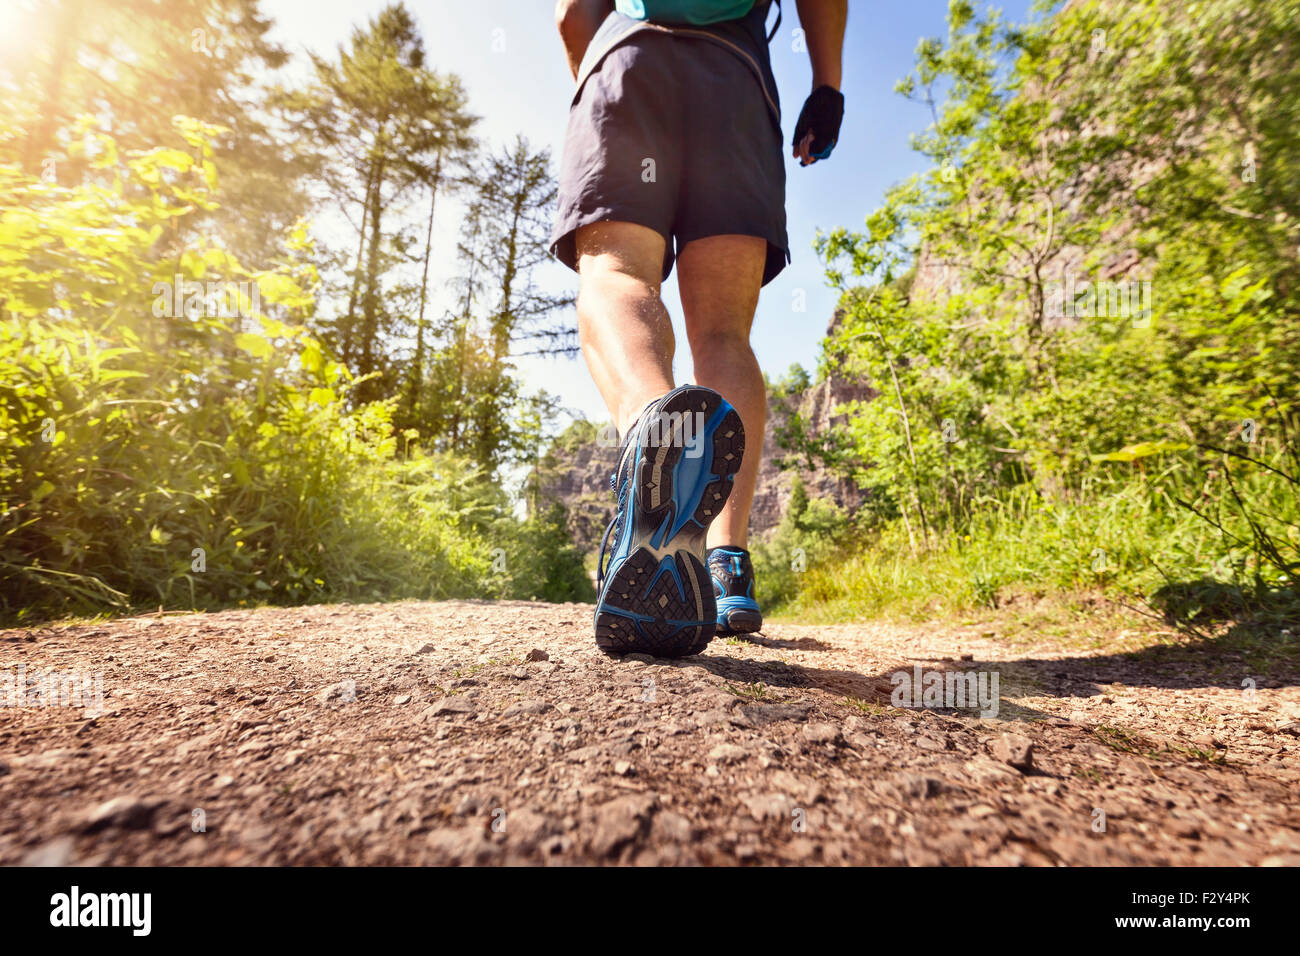 Man jogging or waking outdoors on a footpath or trail concept for healthy lifestyle, sport exercising, running and fitness Stock Photo